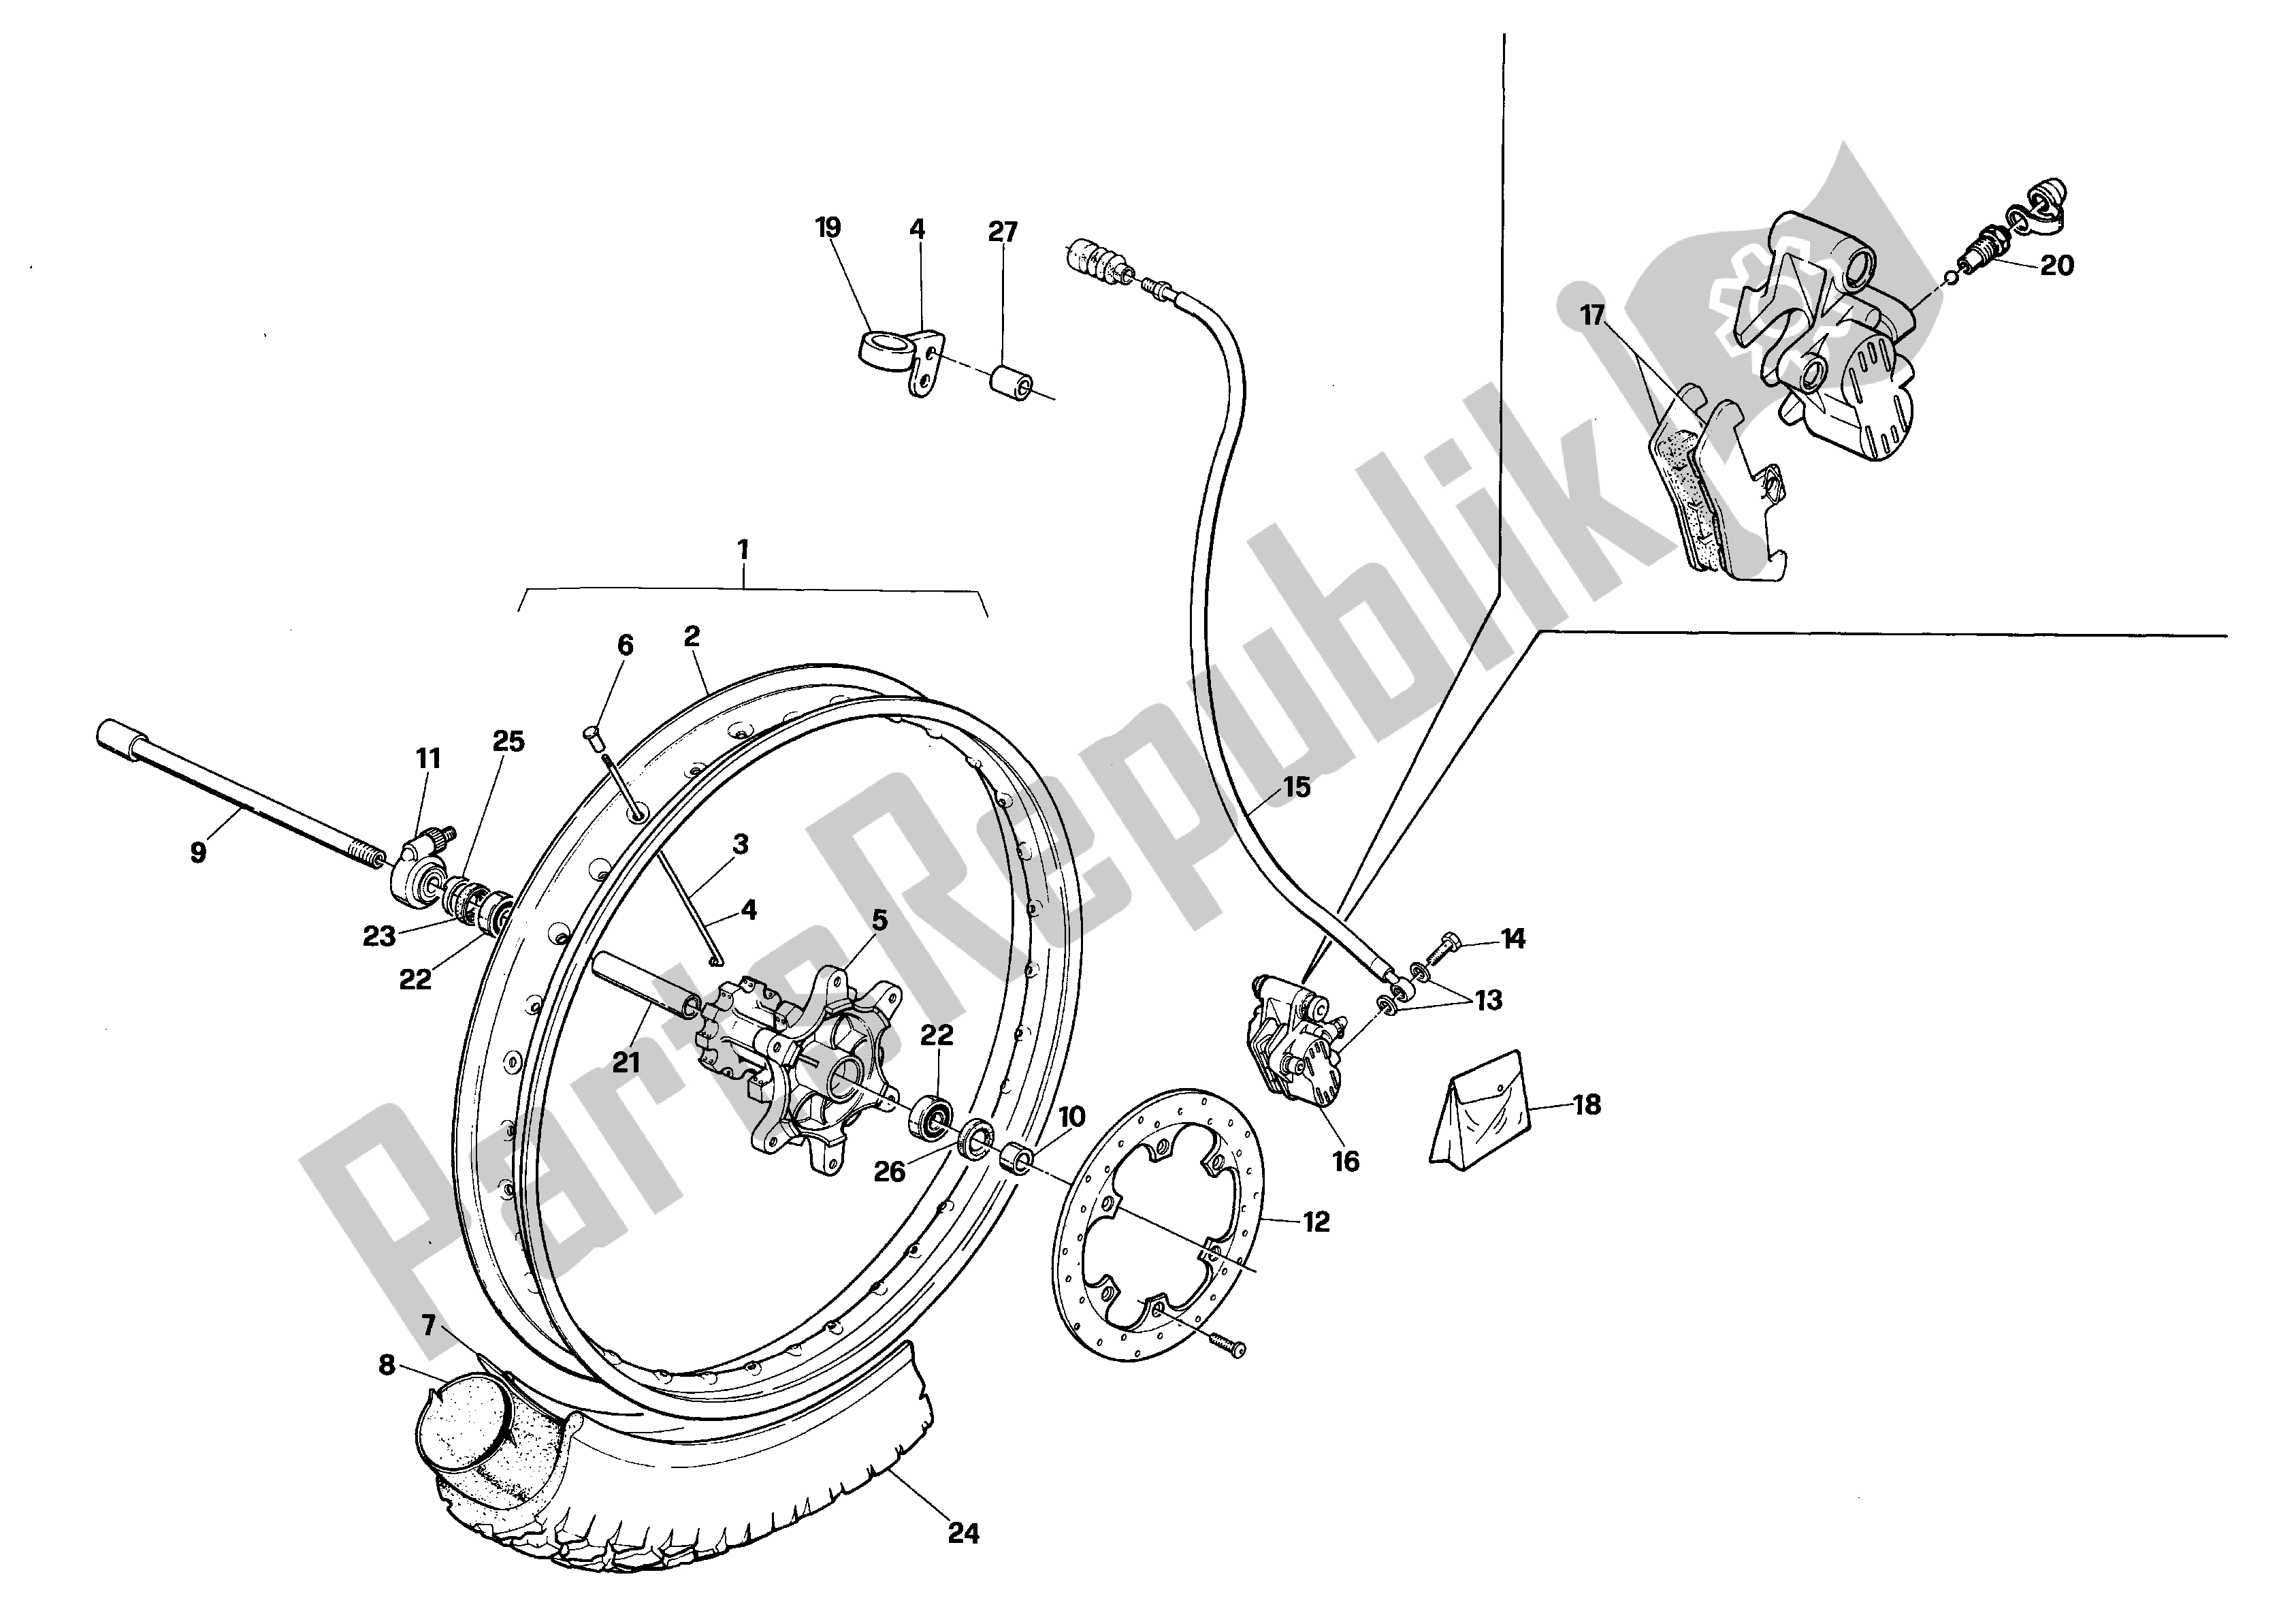 All parts for the Front Wheel of the Aprilia RX 125 1991